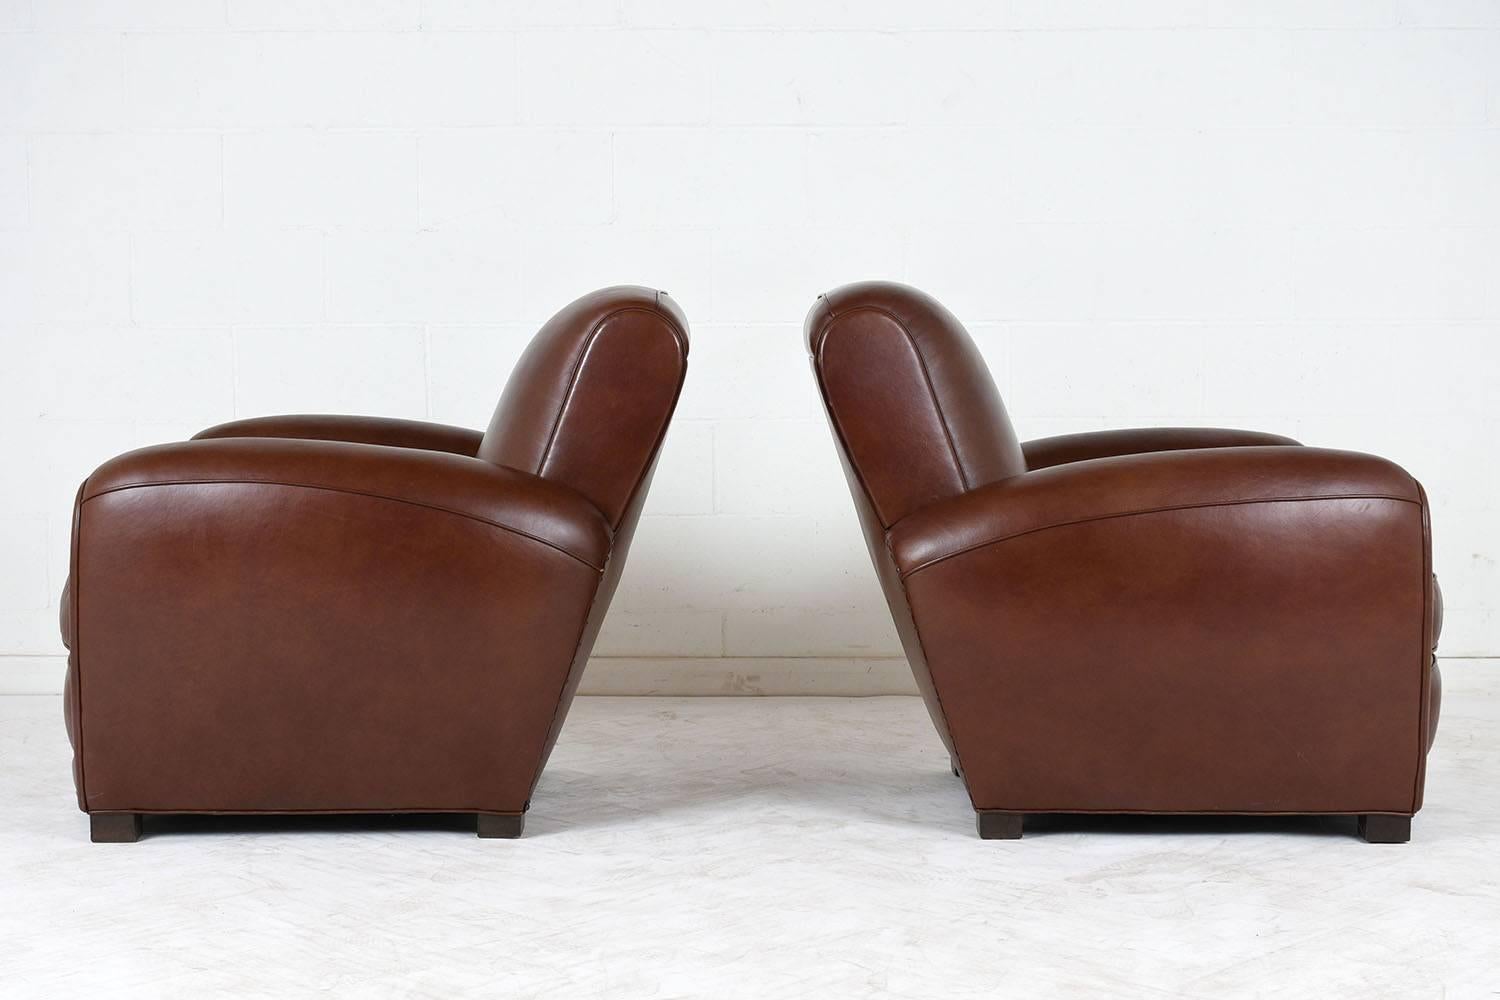 Patinated Pair of French Art Deco Leather Club Chairs